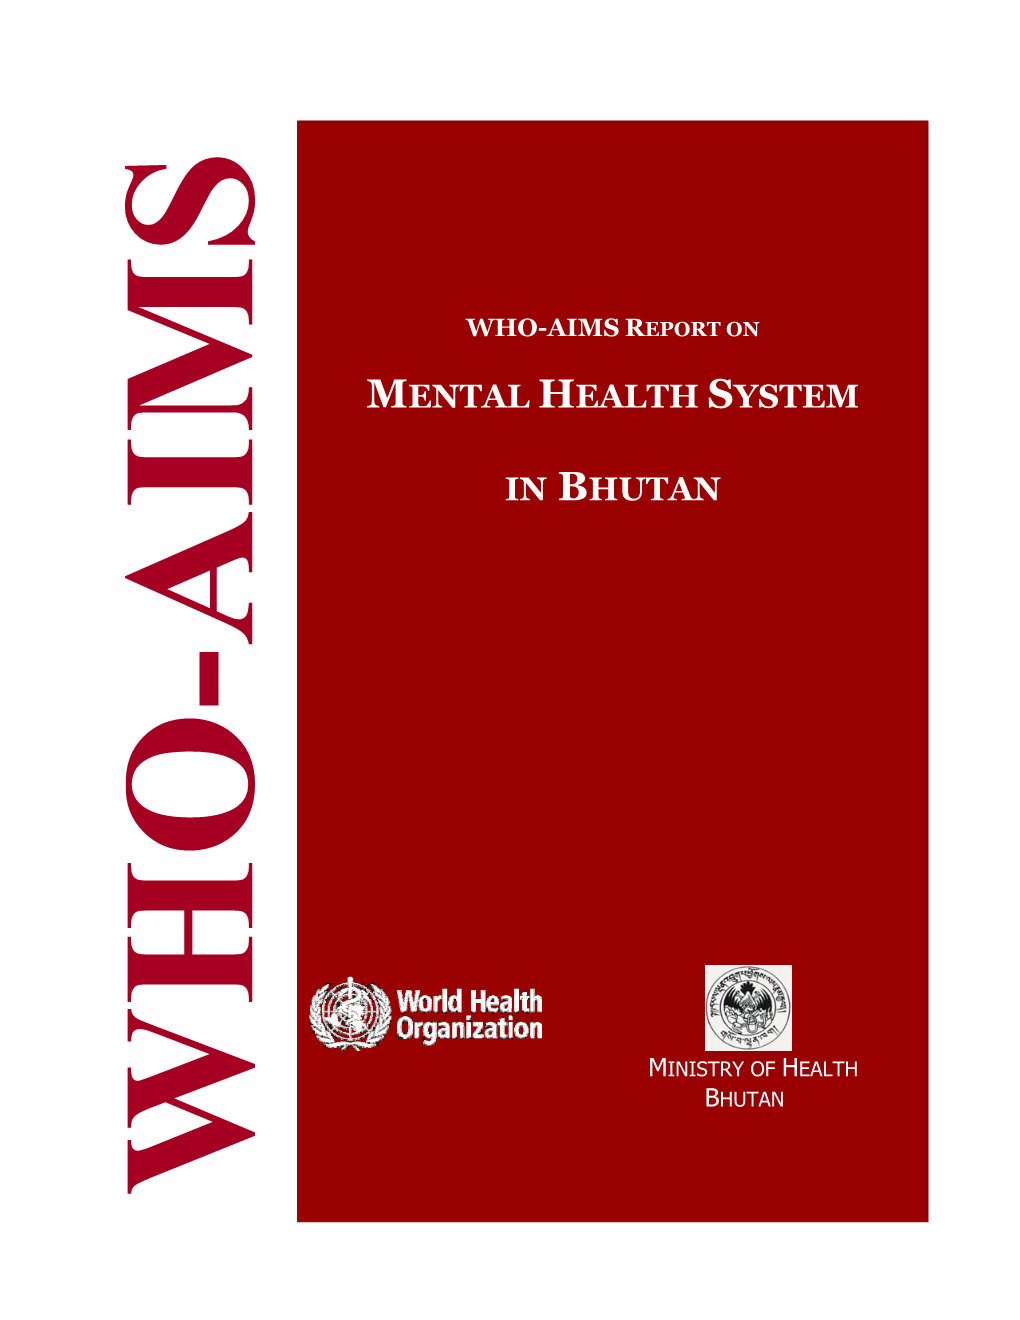 WHO-Aims Report on Mental Health System in Bhutan